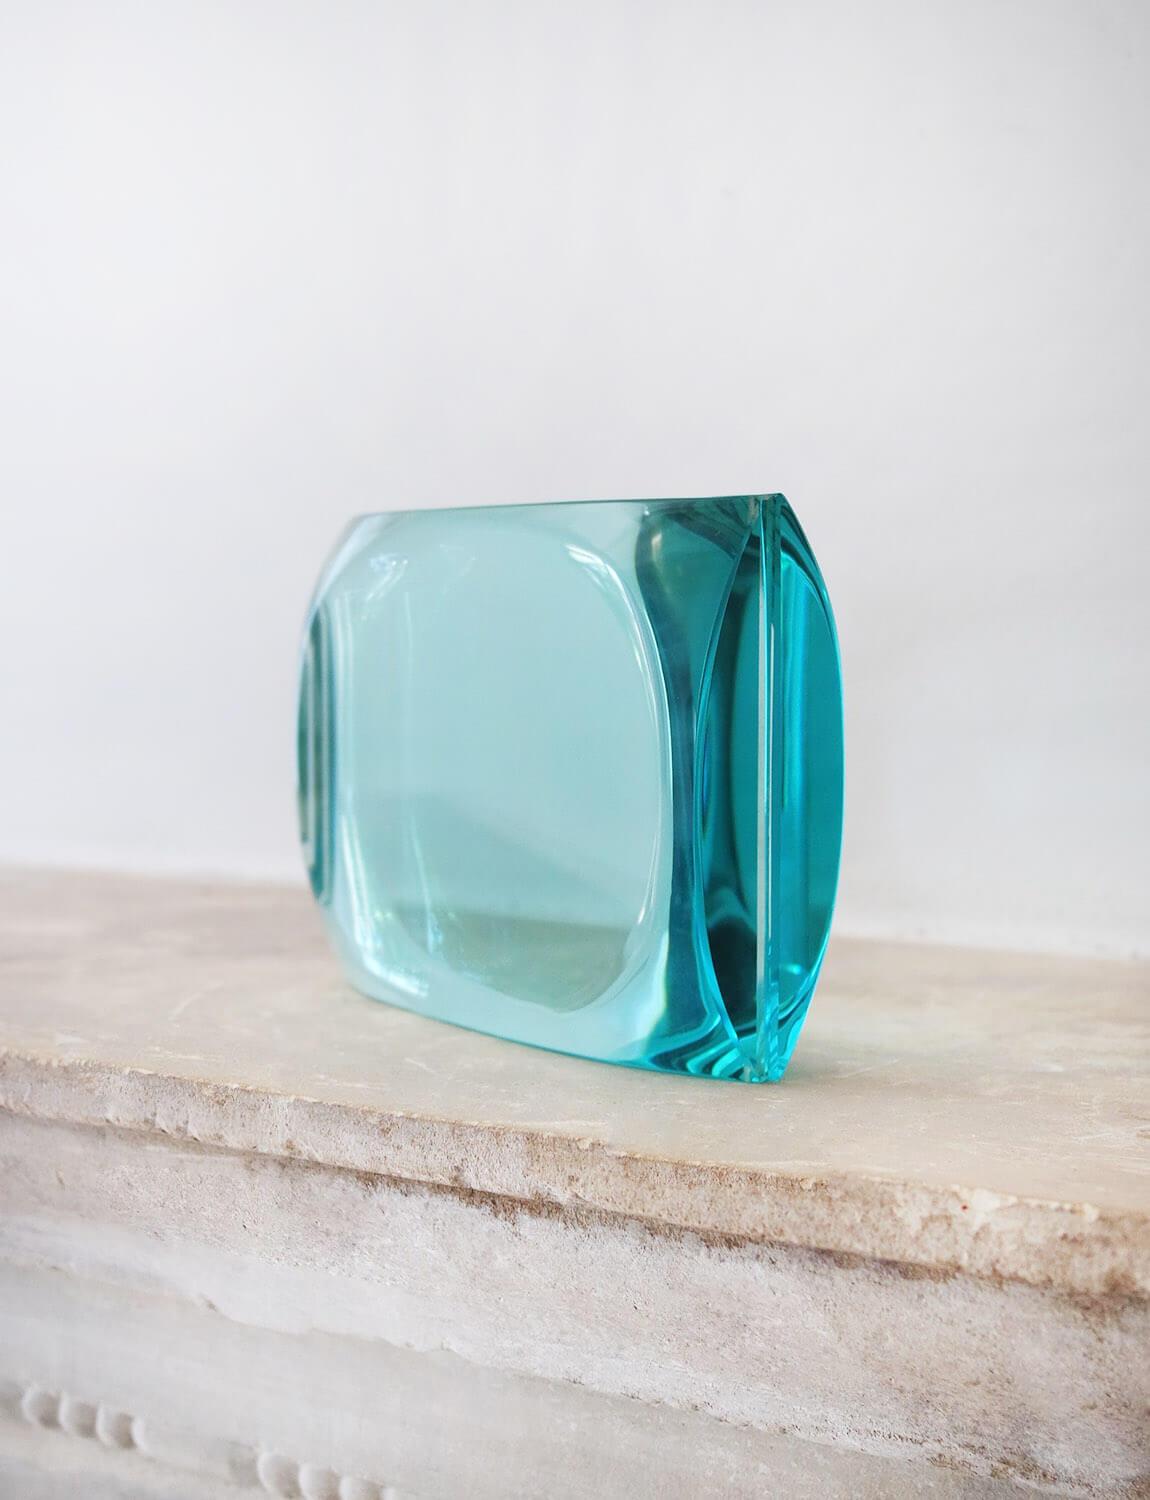 An extraordinary find. This perfectly designed heavy glass picture frame in hand-blown turquoise glass was made by Fontana Arte in the 1950s and was found here in Italy. The design allows a photo or picture to slide between the two thick panes of